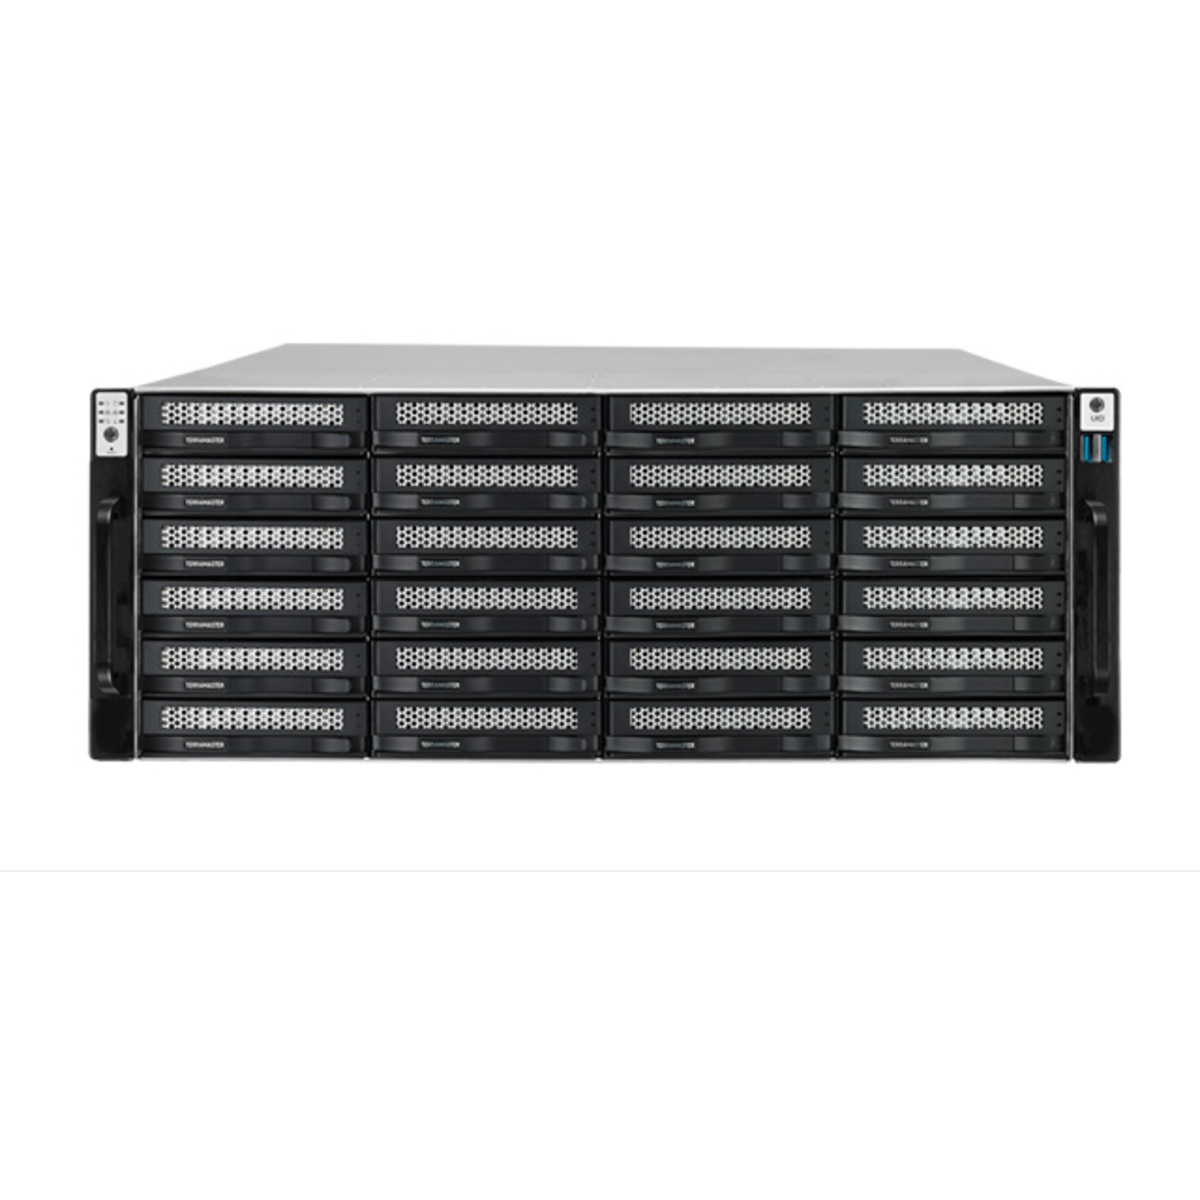 TerraMaster U24-722-2224 92tb 24-Bay RackMount Large Business / Enterprise NAS - Network Attached Storage Device 23x4tb Crucial MX500 CT4000MX500SSD1 2.5 560/510MB/s SATA 6Gb/s SSD CONSUMER Class Drives Installed - Burn-In Tested U24-722-2224